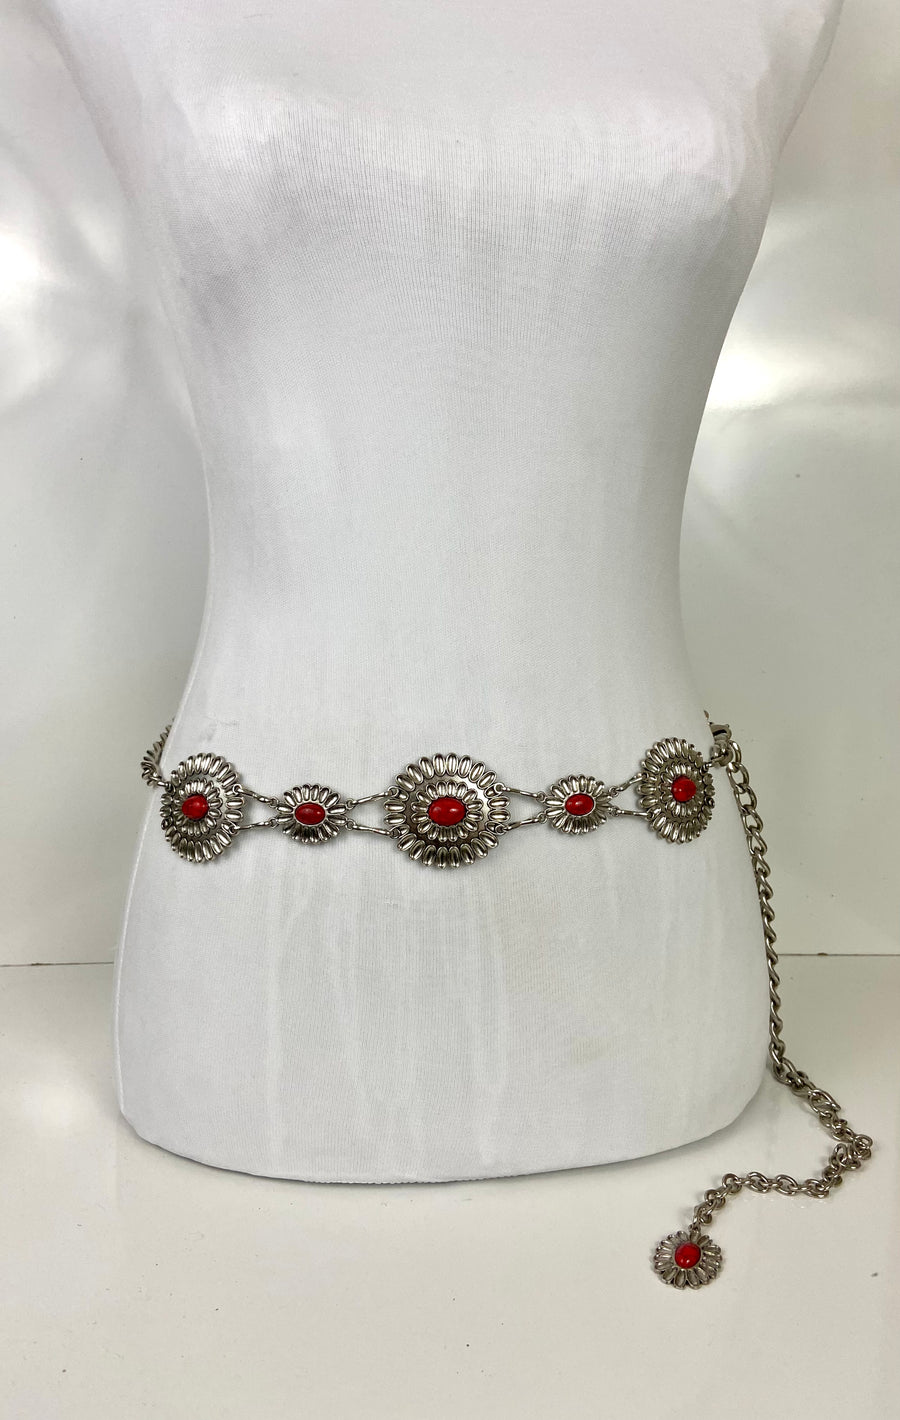 Red and silver stone concho belt